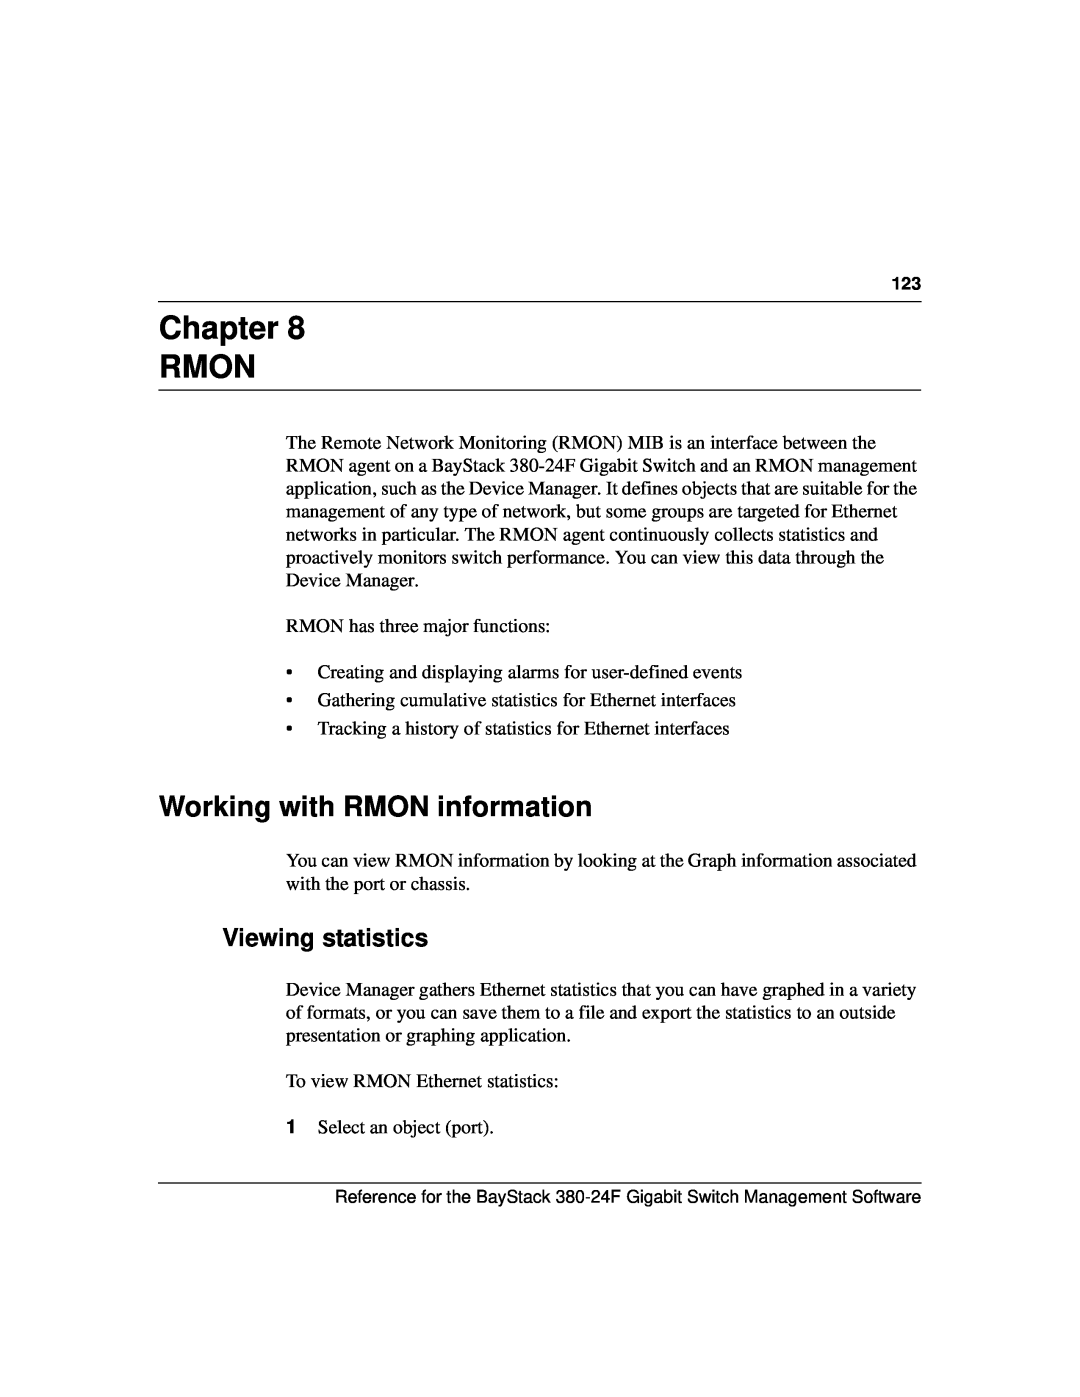 Nortel Networks 214393-A manual Chapter RMON, Working with RMON information, Viewing statistics 